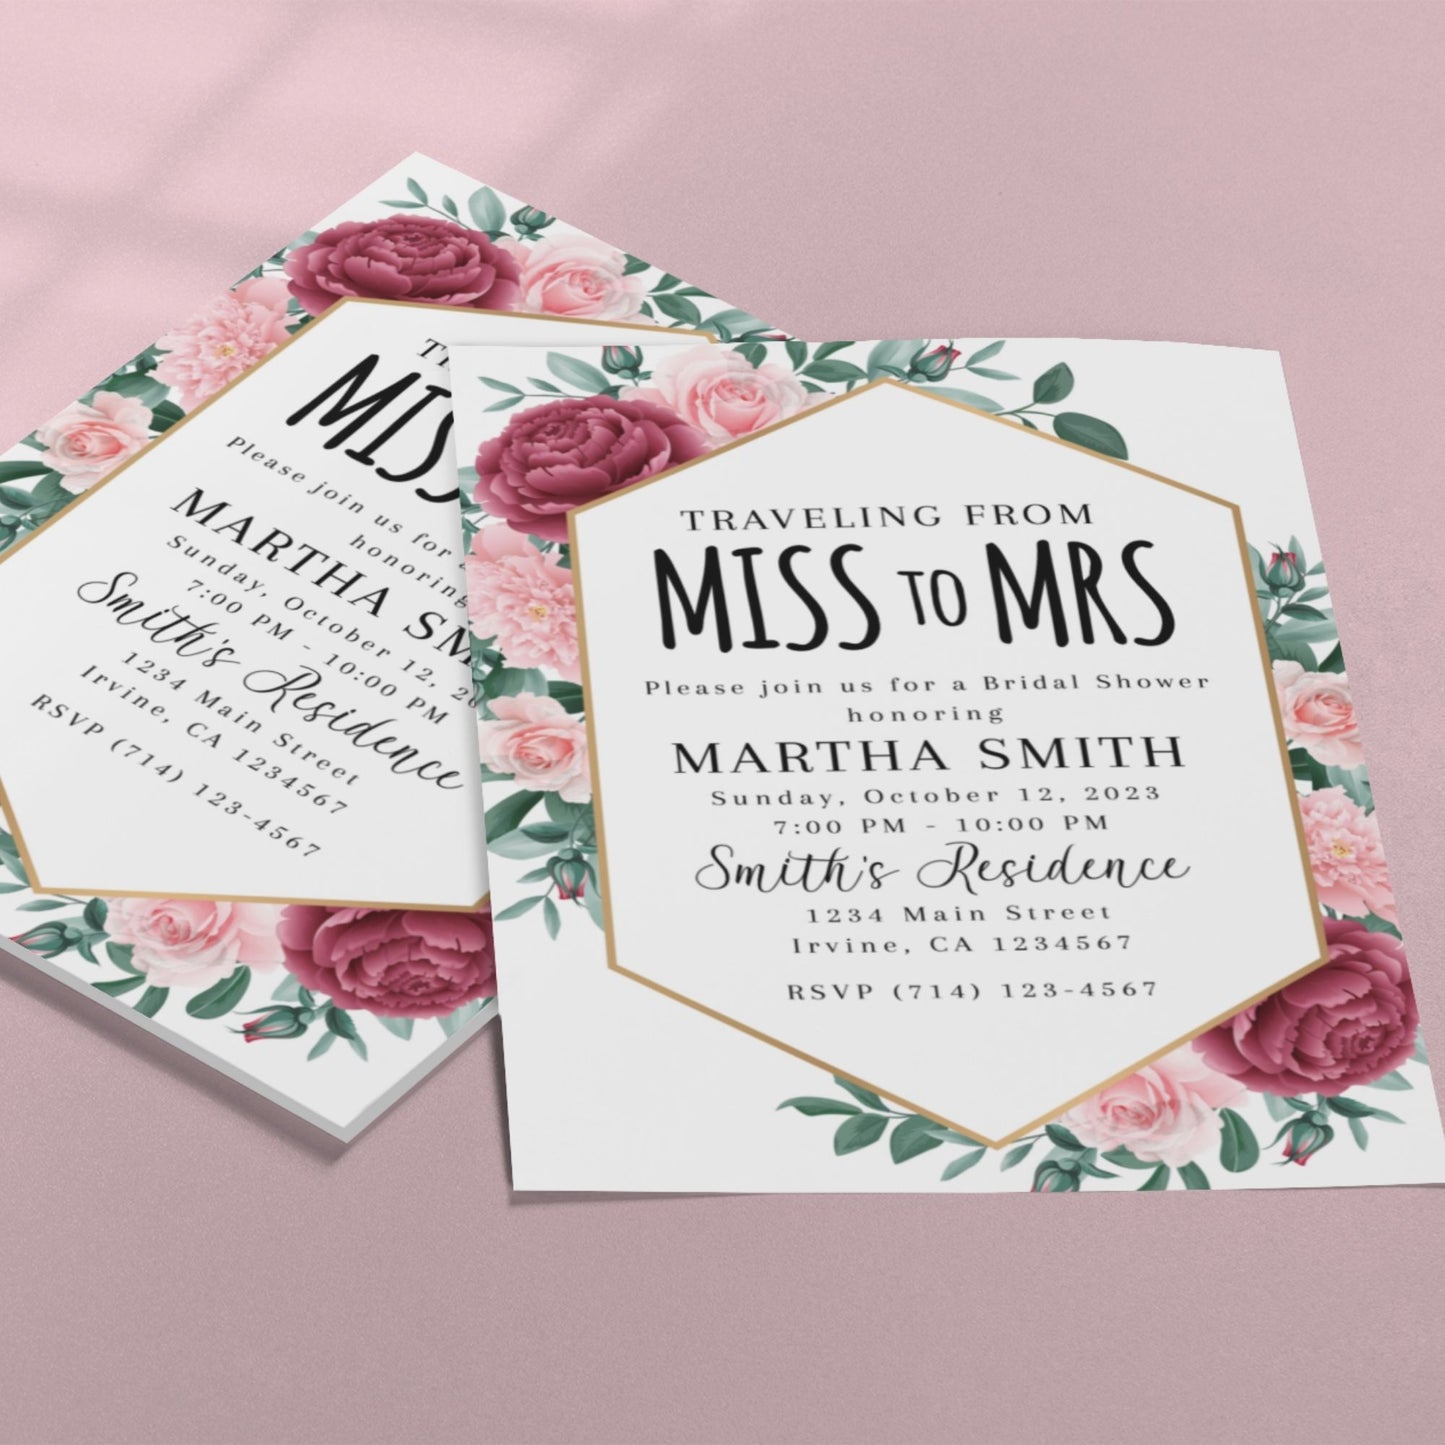 Miss to Mrs Invitation Template - Floral